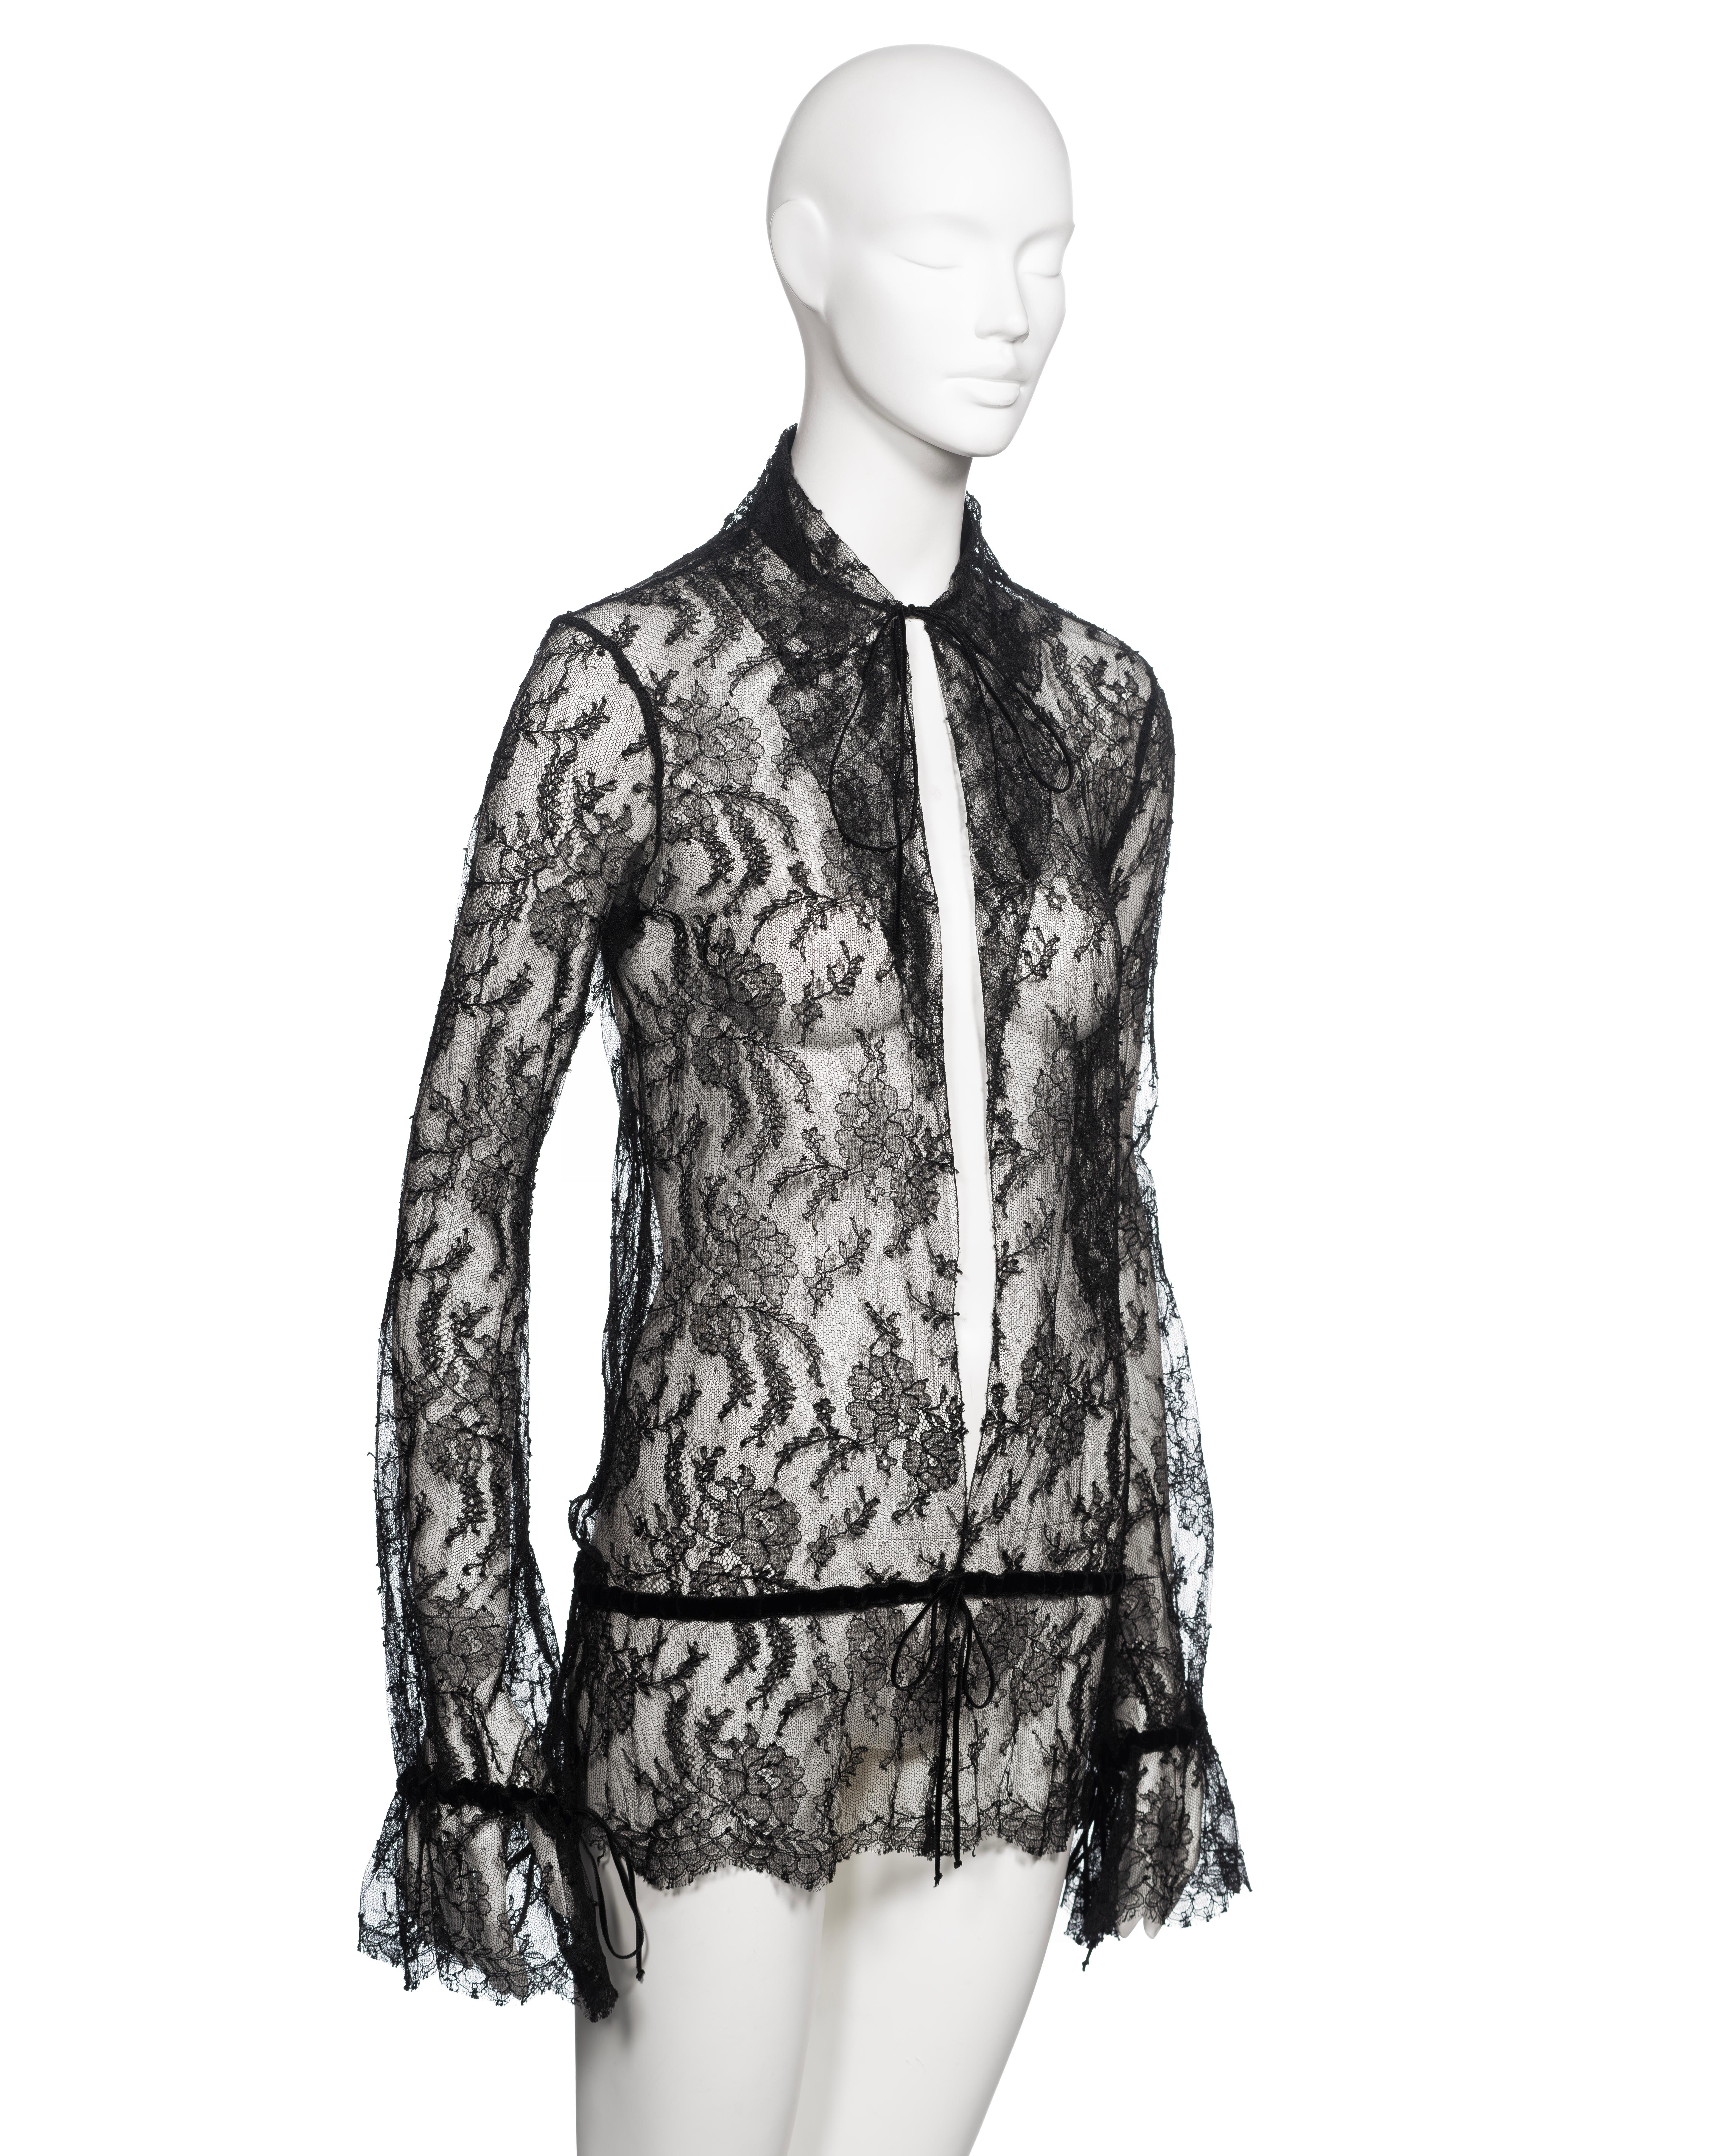 Women's Chanel by Karl Lagerfeld Black Lace Blouse with Velvet Ribbon Trim, FW 2004